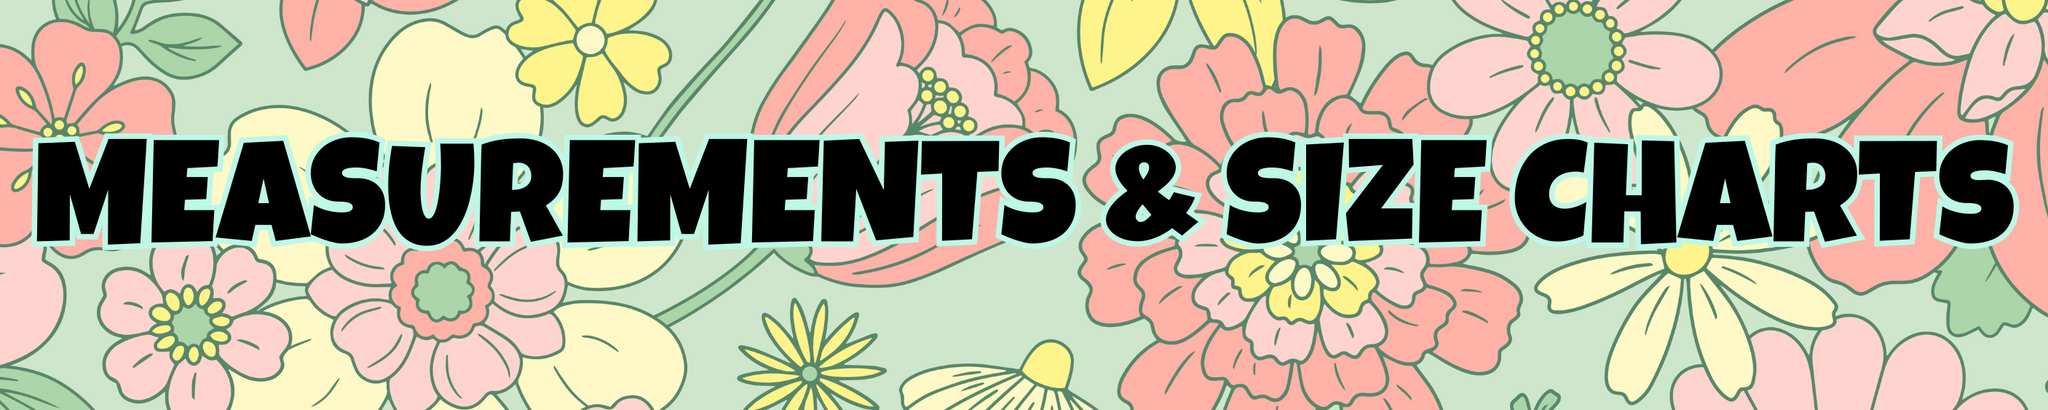 Floral background in mint, coral pink and soft yellow with "Measurements & Size Charts" written in black block letters